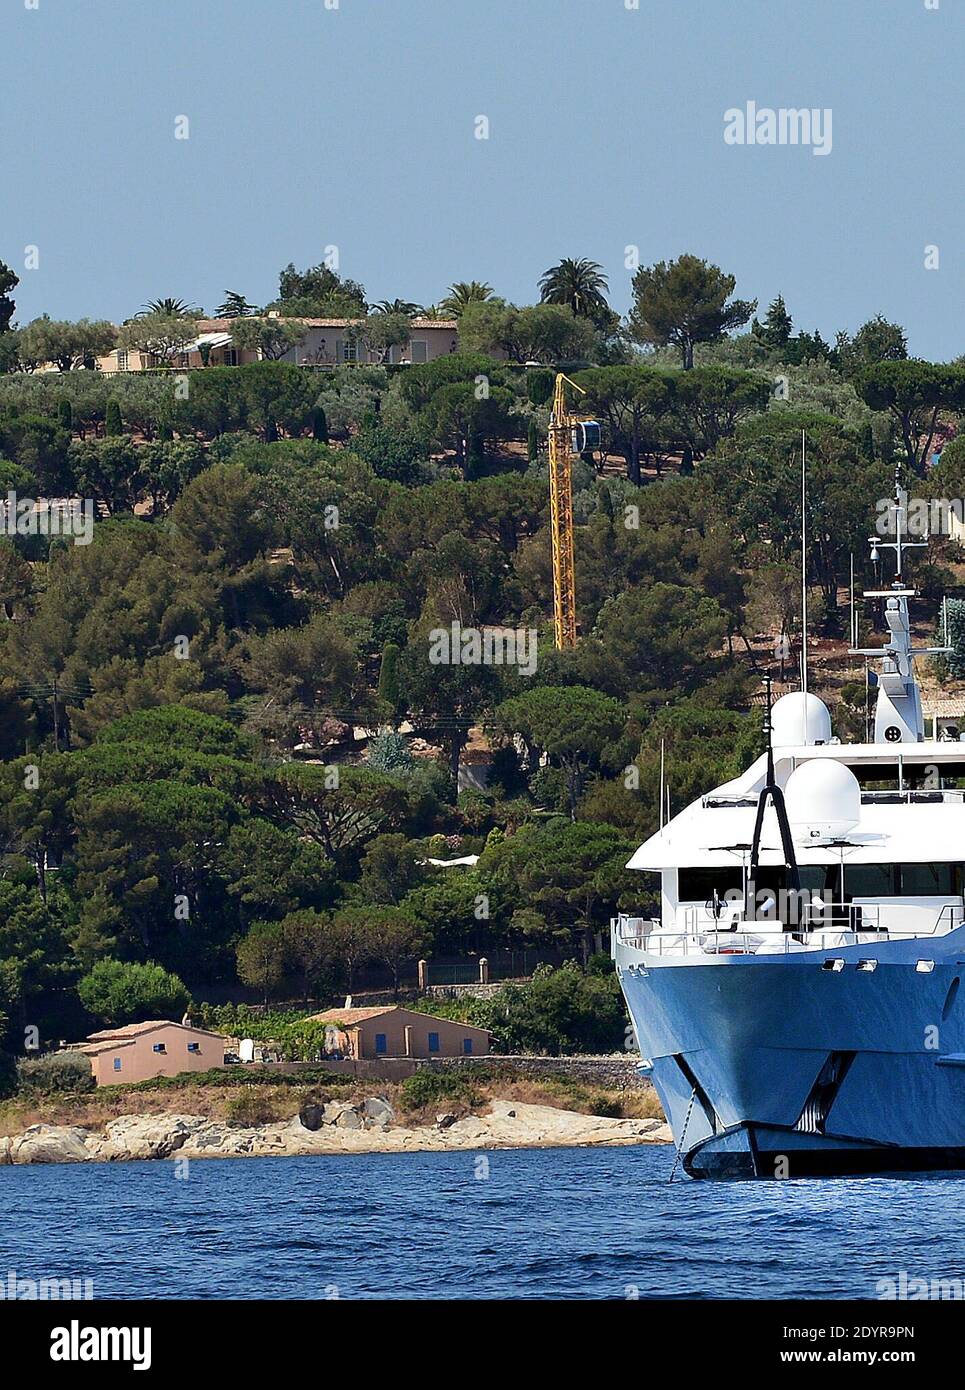 A picture taken on July 10, 2013 shows the private villa Mandala of French tycoon Bernard Tapie, in Saint-Tropez, French Riviera, France on July 10, Corruption investigators in France have seized